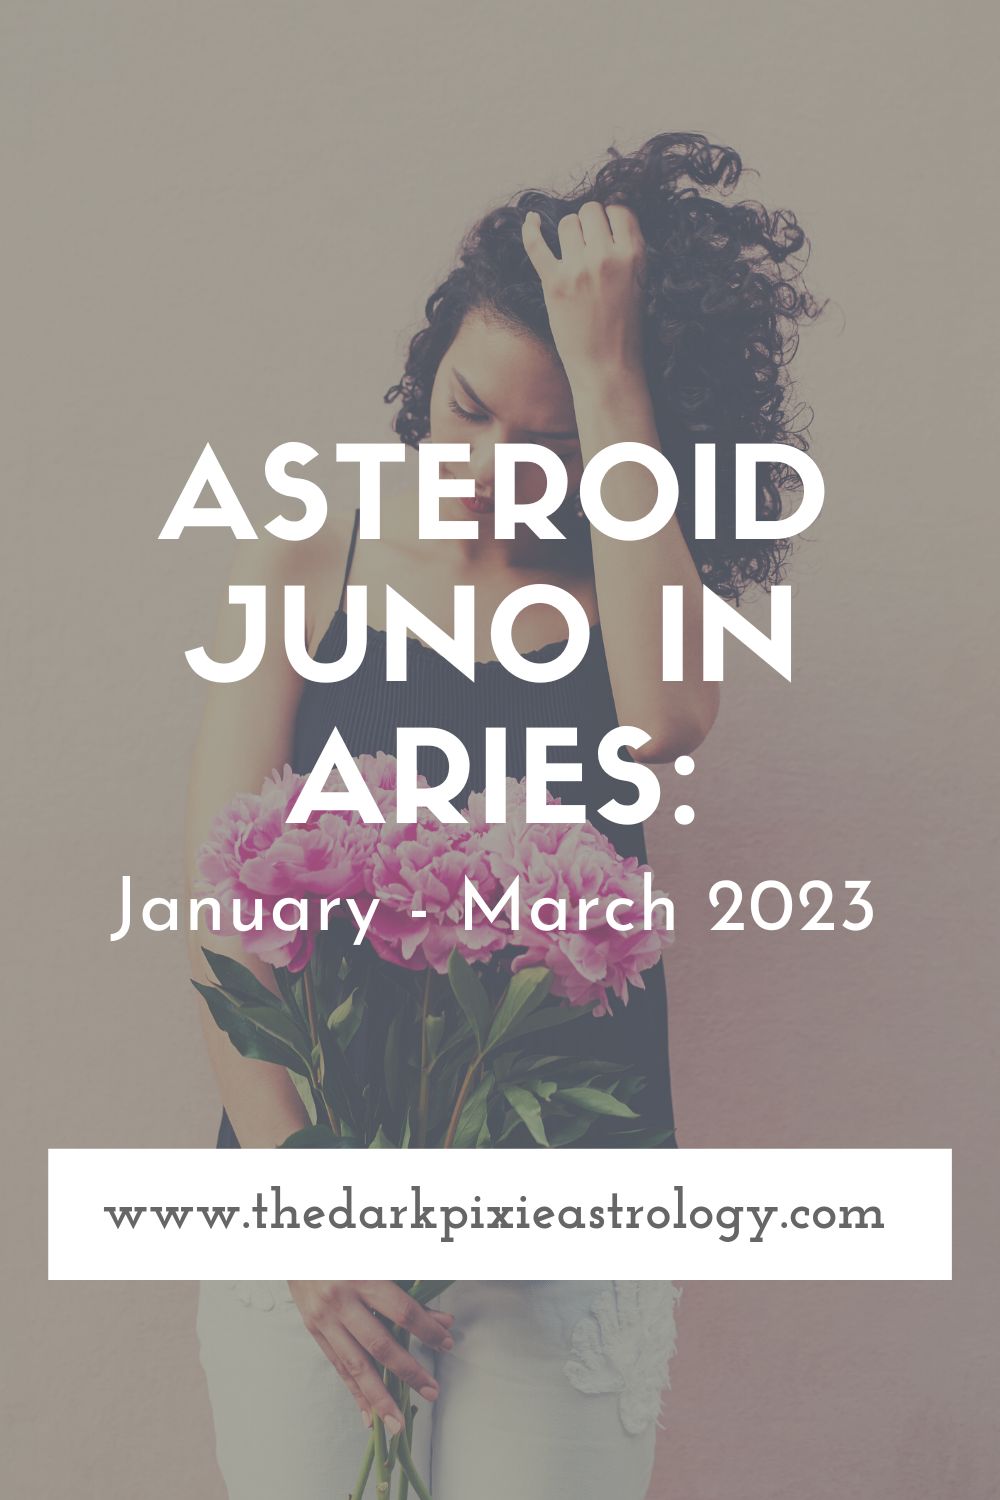 Asteroid Juno in Aries: January - March 2023 - The Dark Pixie Astrology